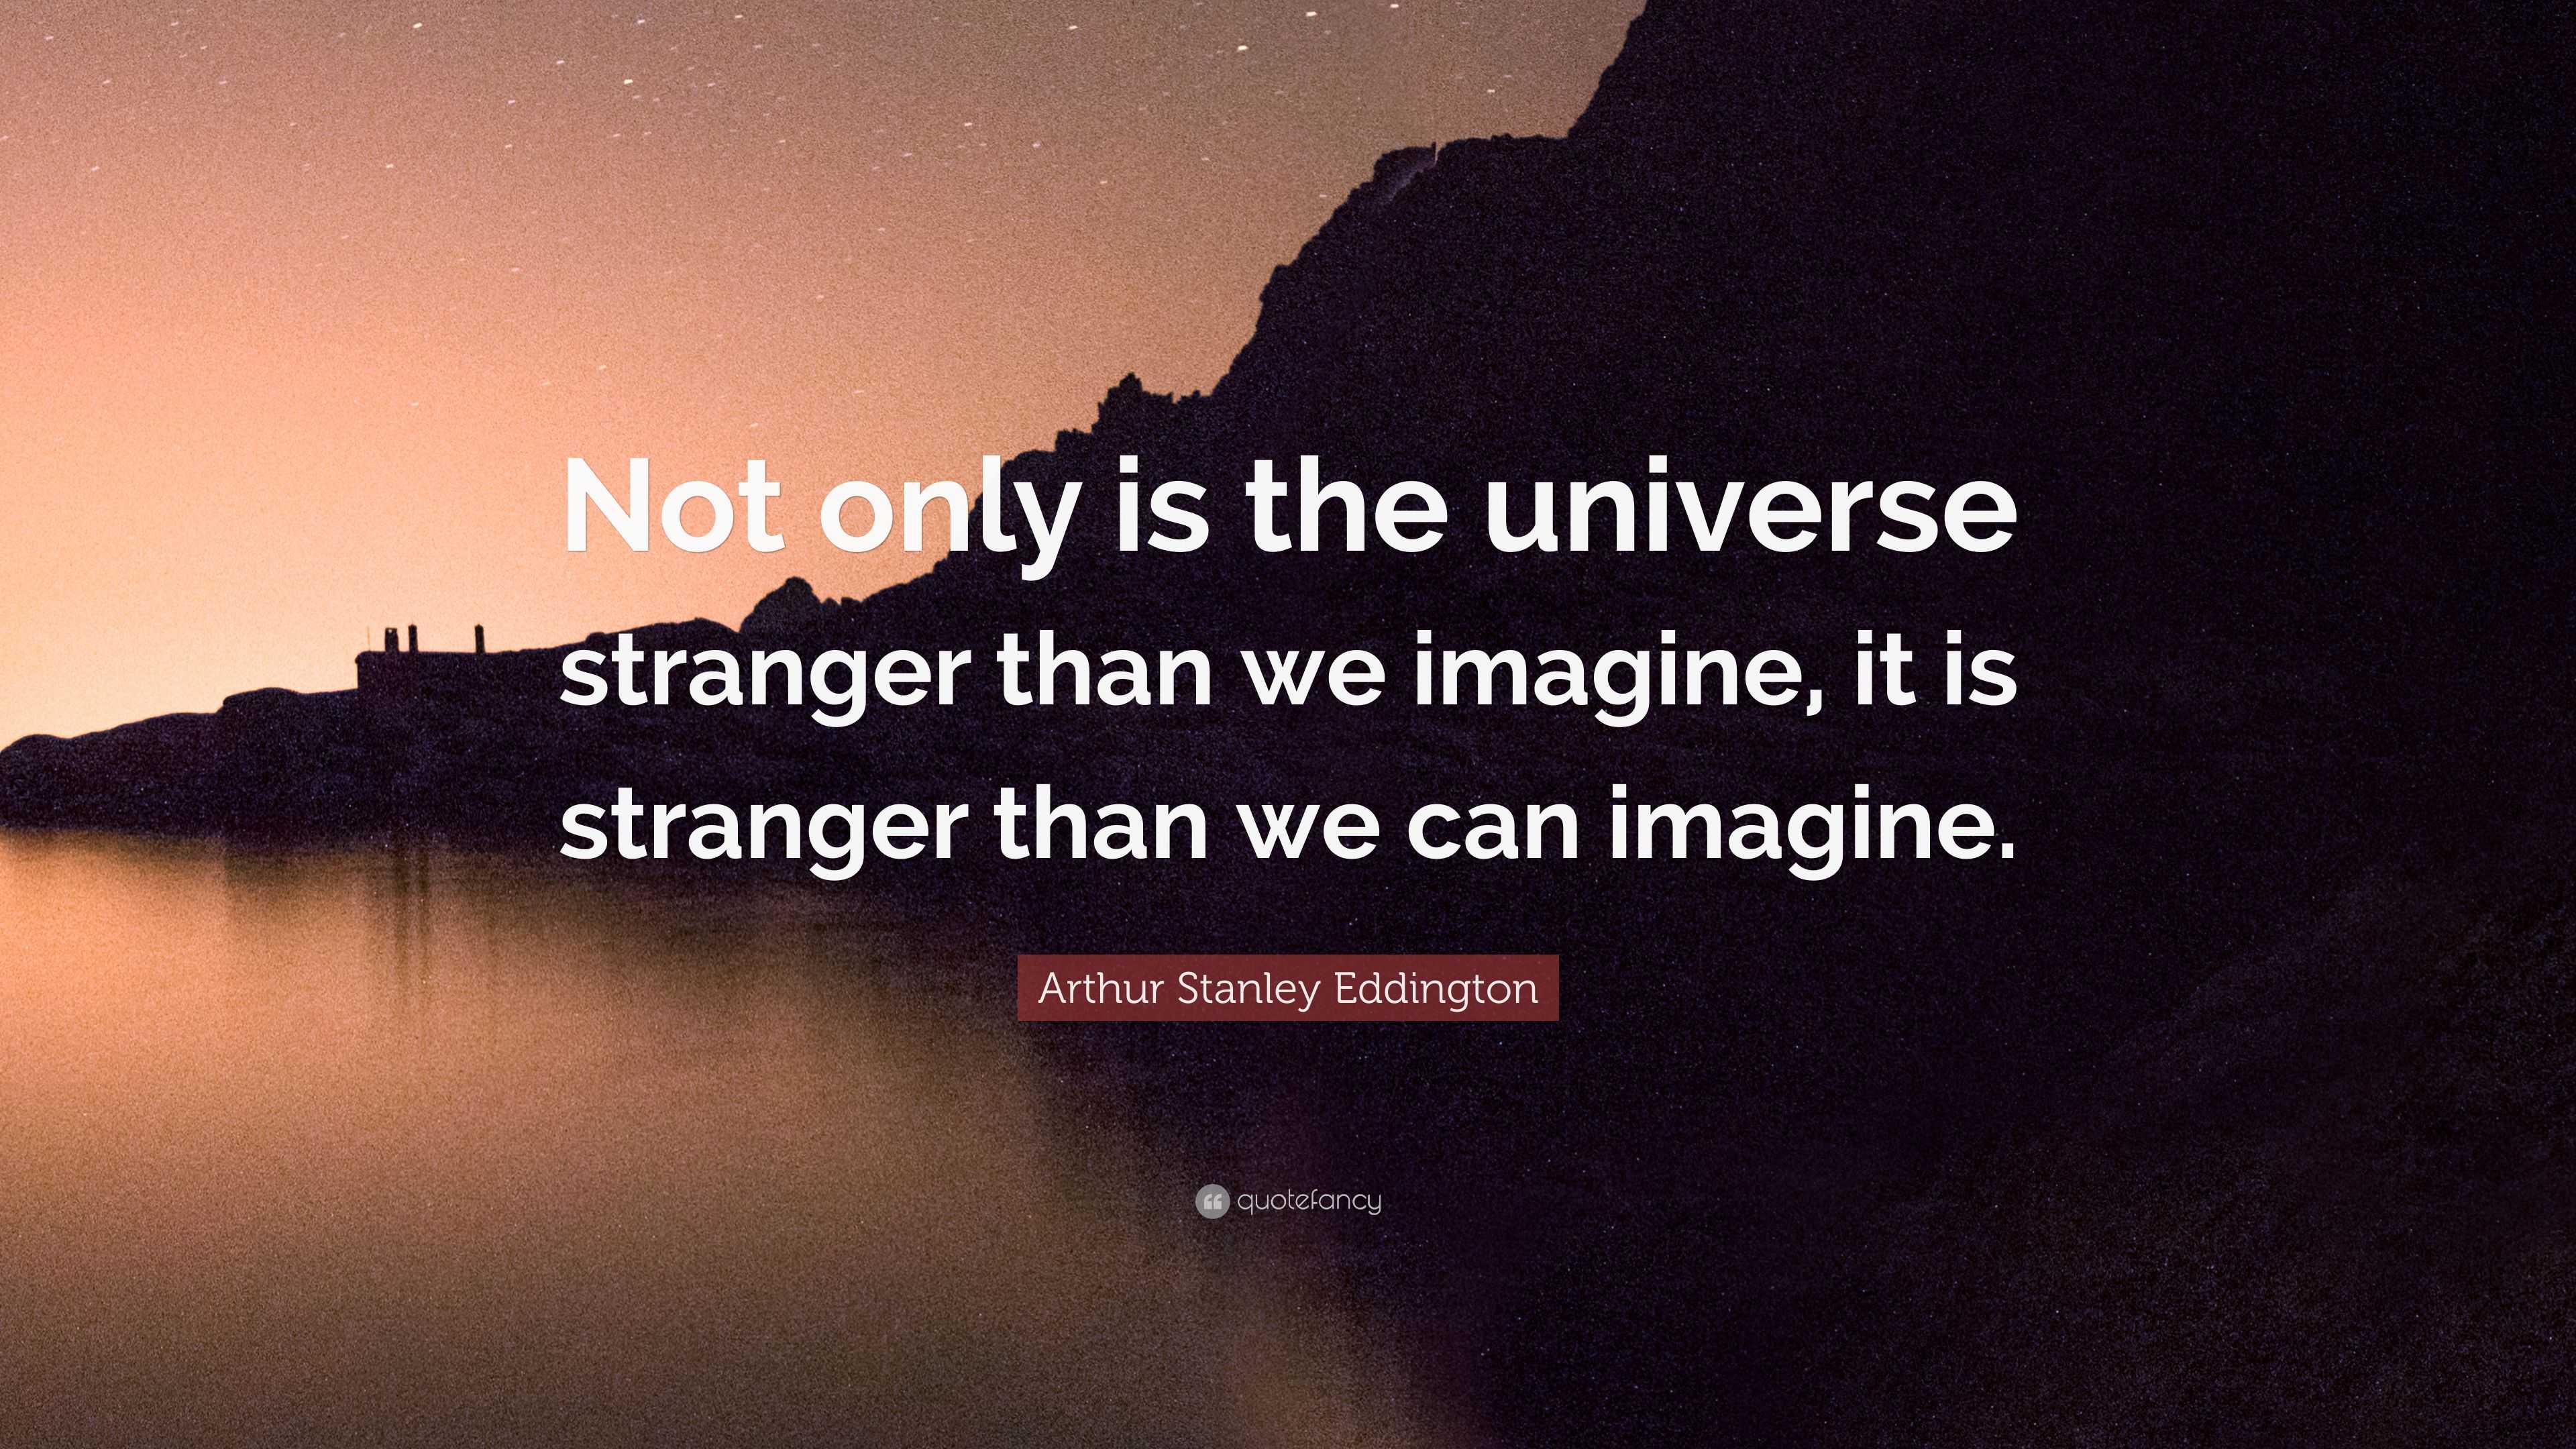 Arthur Stanley Eddington Quote: “Not only is the universe stranger than ...